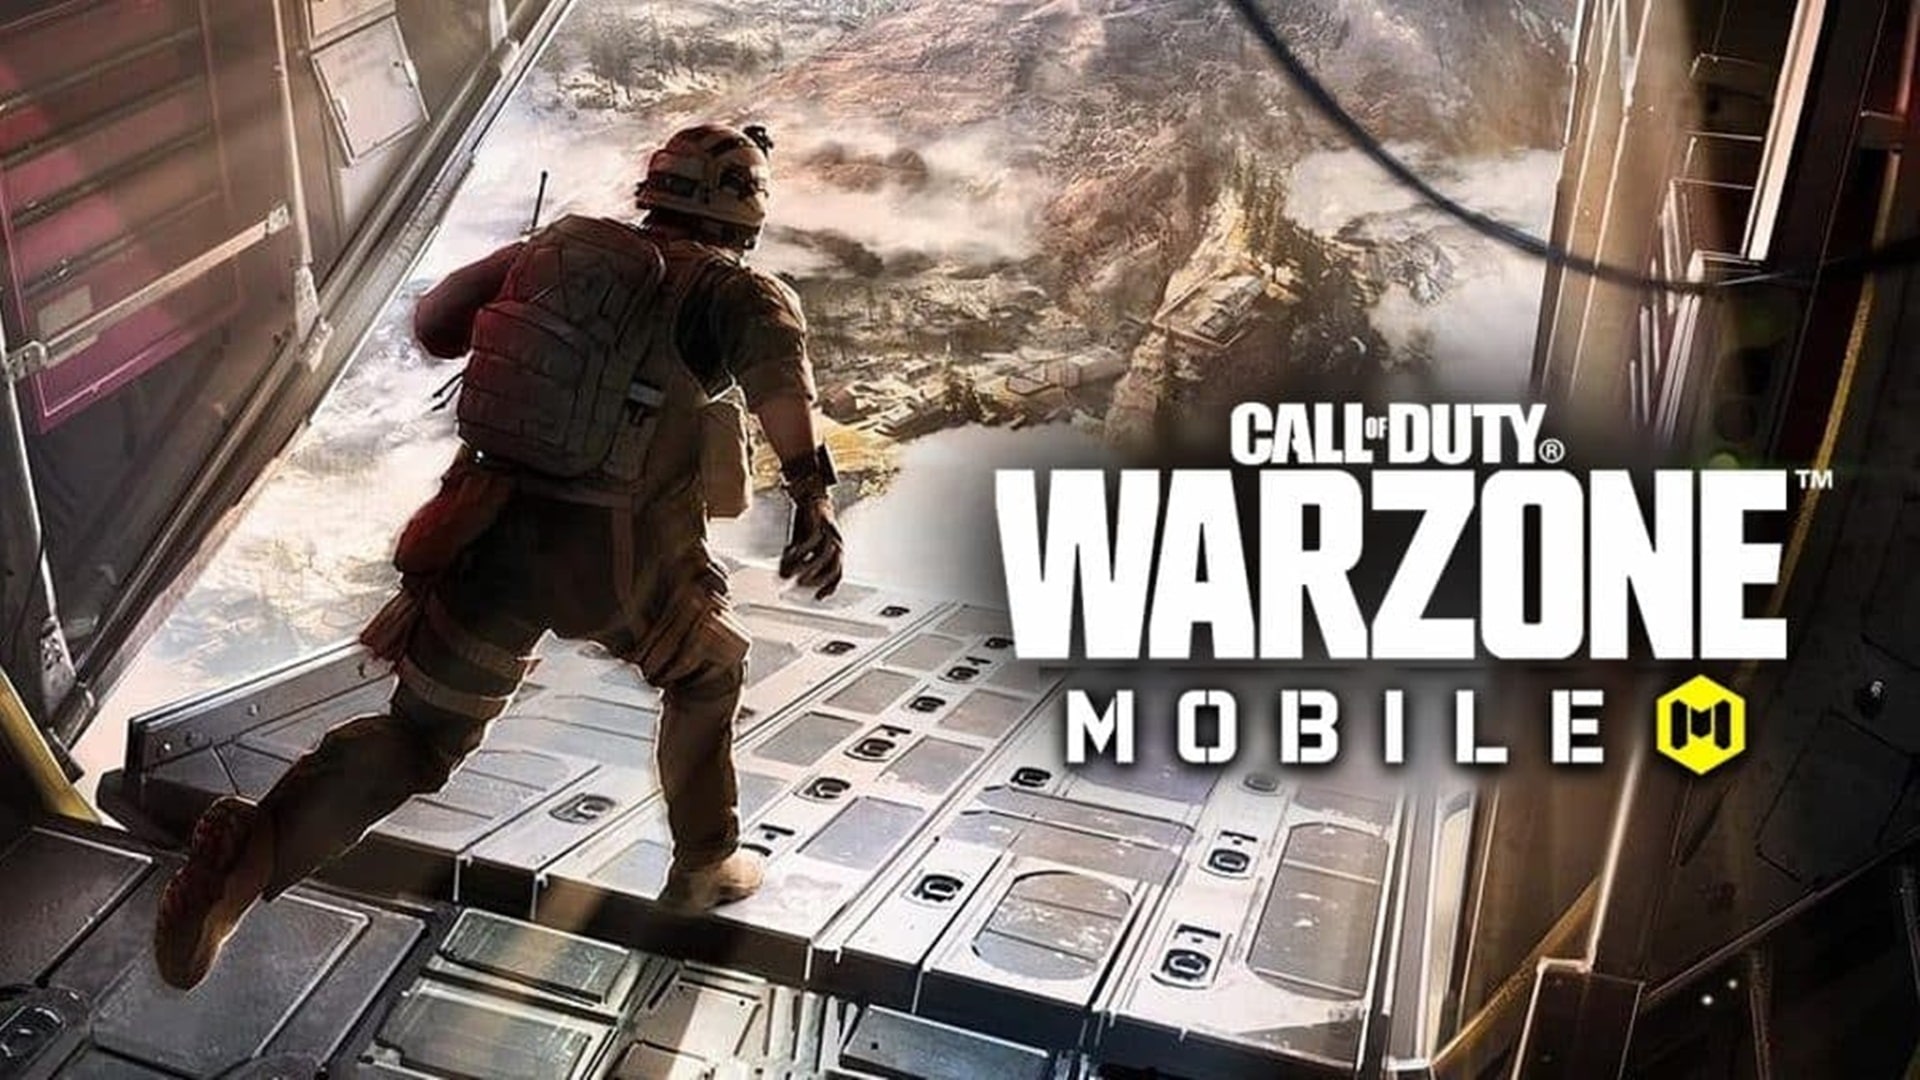 Call of Duty: Warzone Mobile Screenshots Leak Online, Activision Removes Them, GamersRD